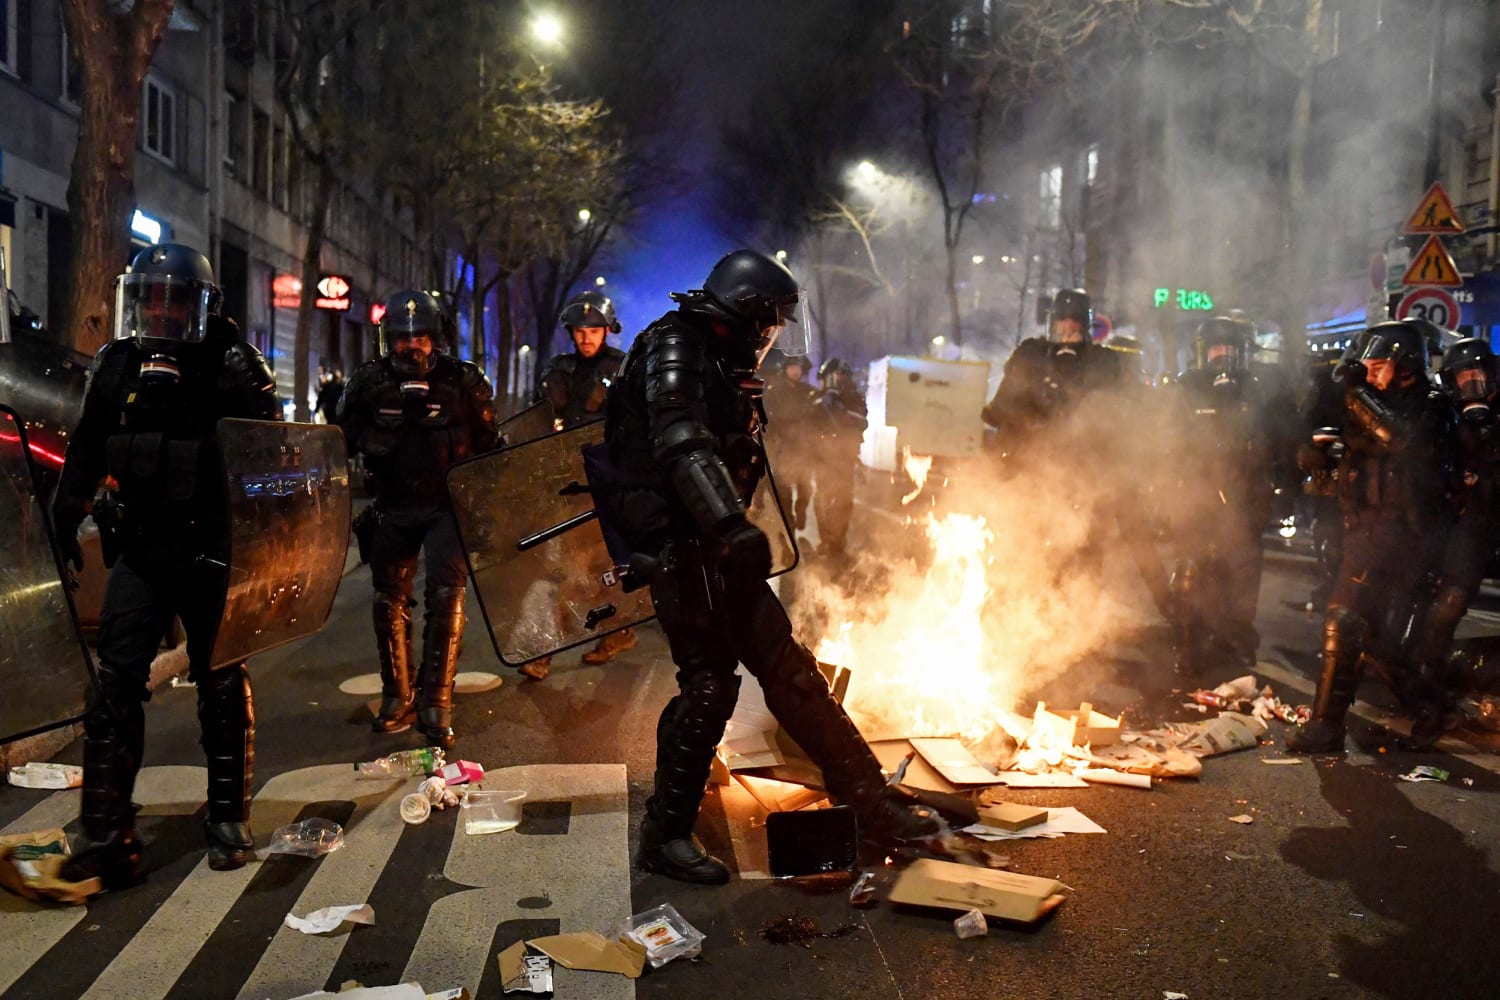 Paris police, protesters clash for third night over Macron’s pension reform